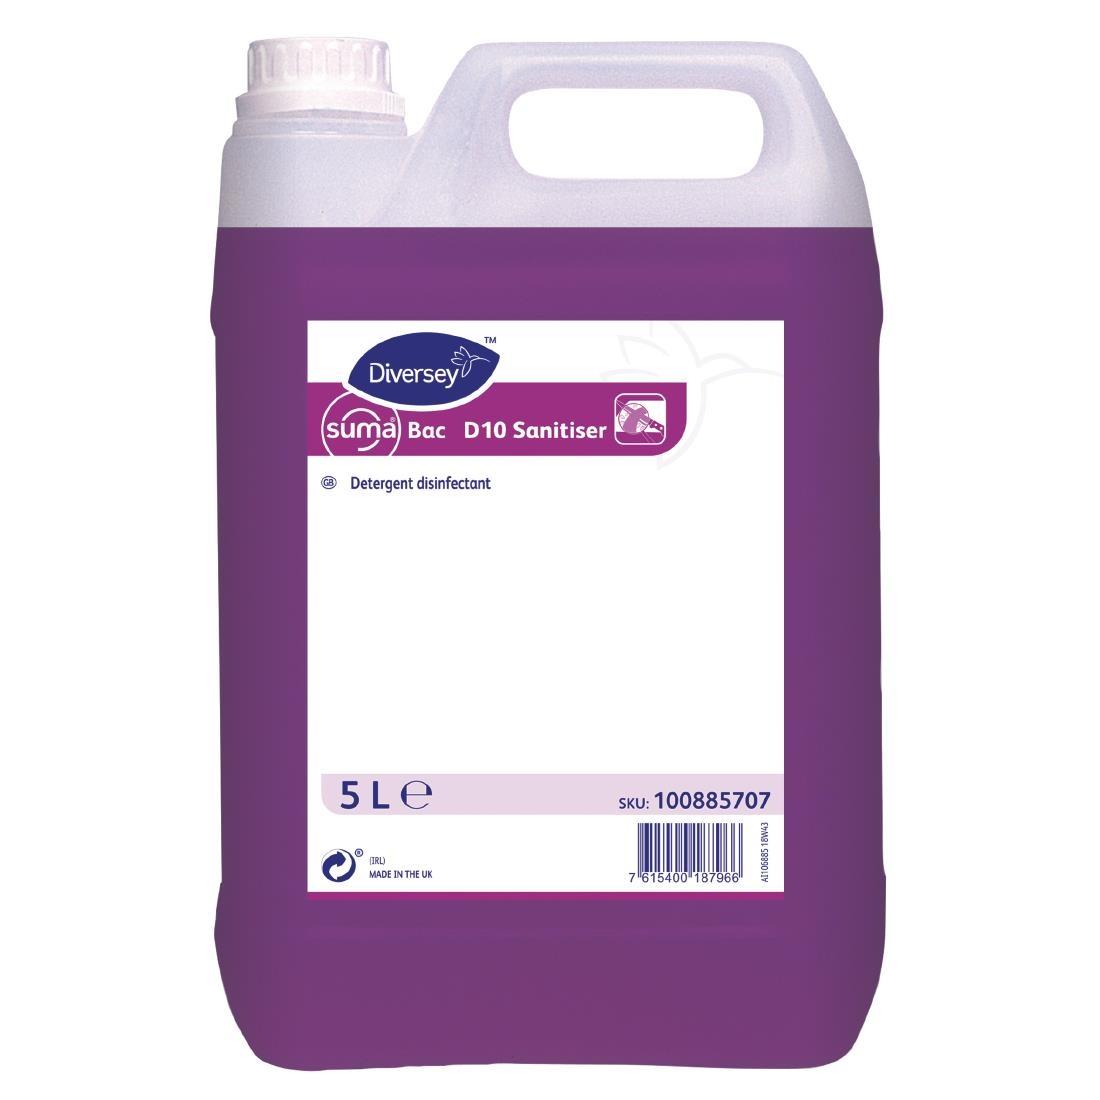 Suma Bac D10 Cleaner and Sanitiser Concentrate 5Ltr (Pack of 2) - CD517  - 1